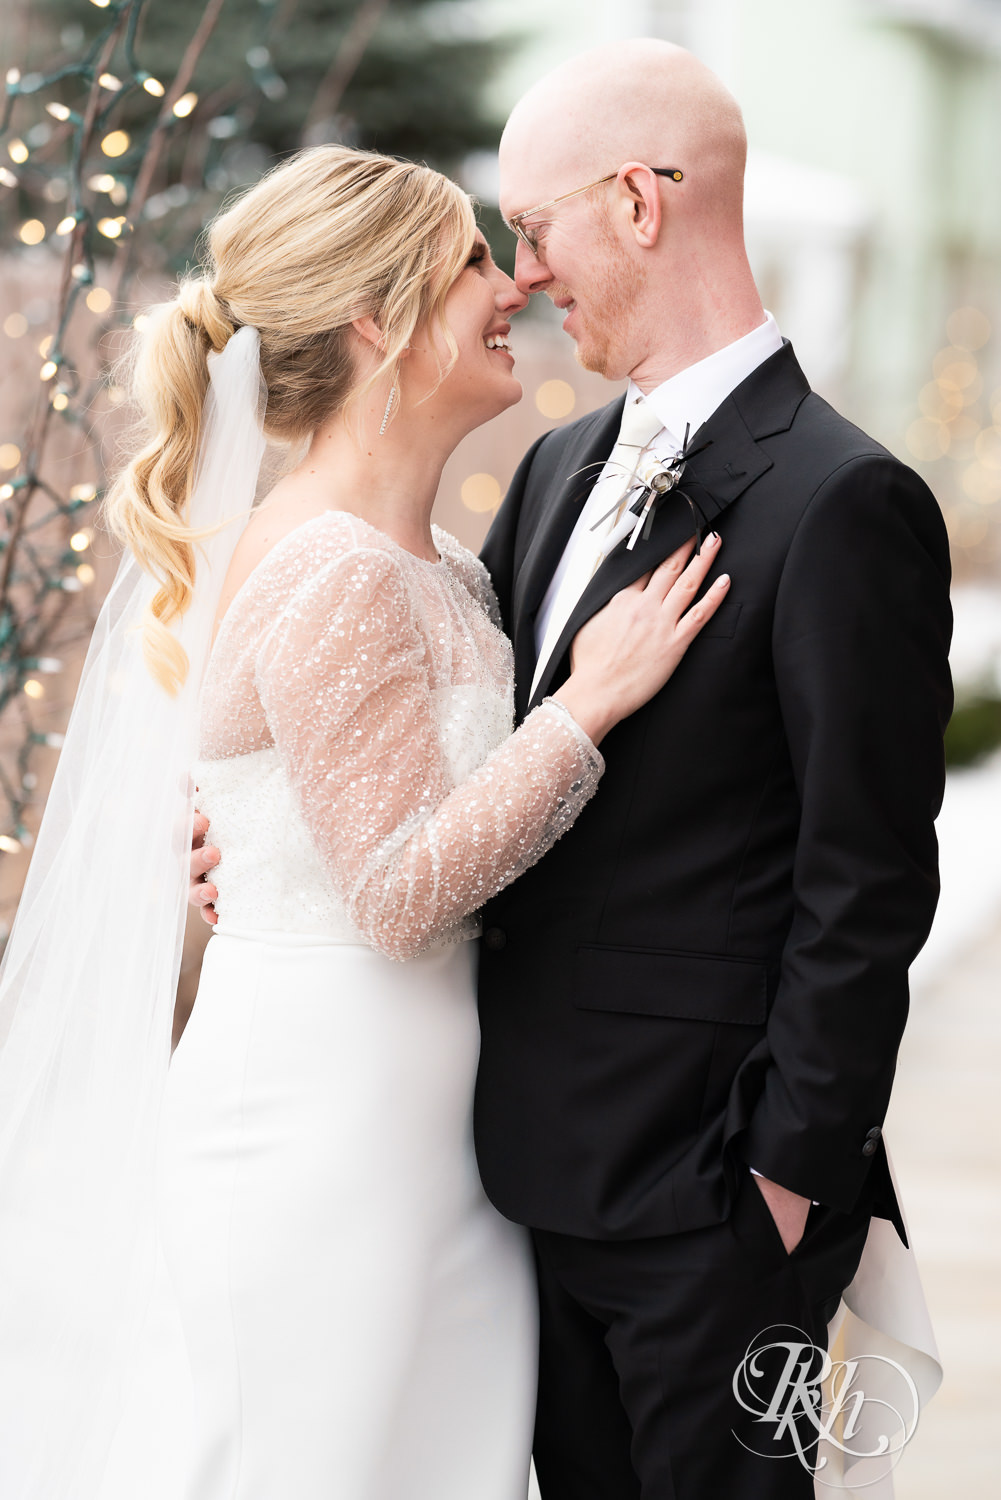 Bride and groom smile during winter wedding at Gatherings at Station 10 in Saint Paul, Minnesota.